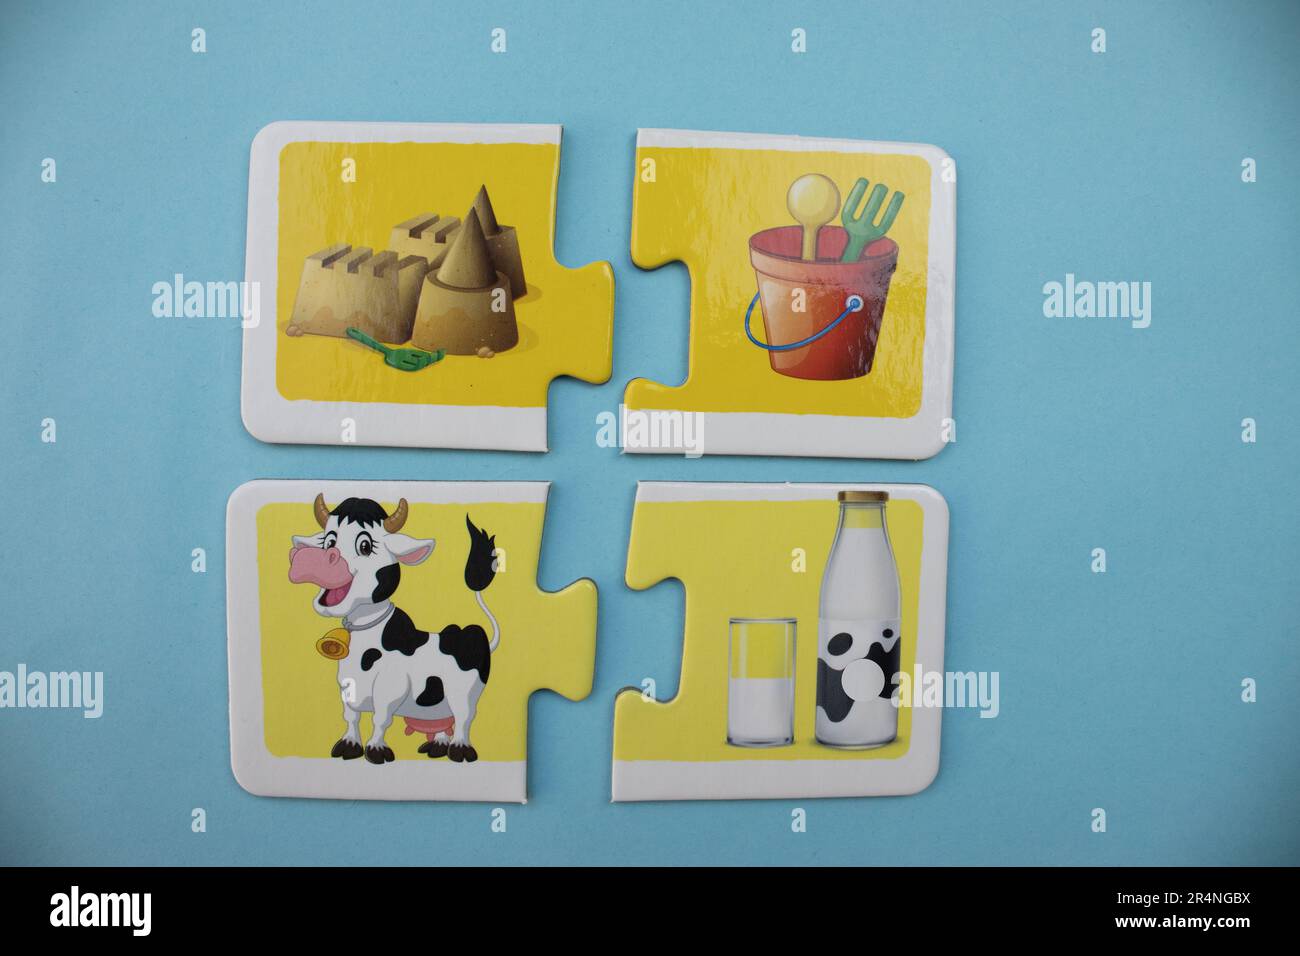 Information puzzles placed on a blue background. Cow, milk, sand and bucket. Stock Photo